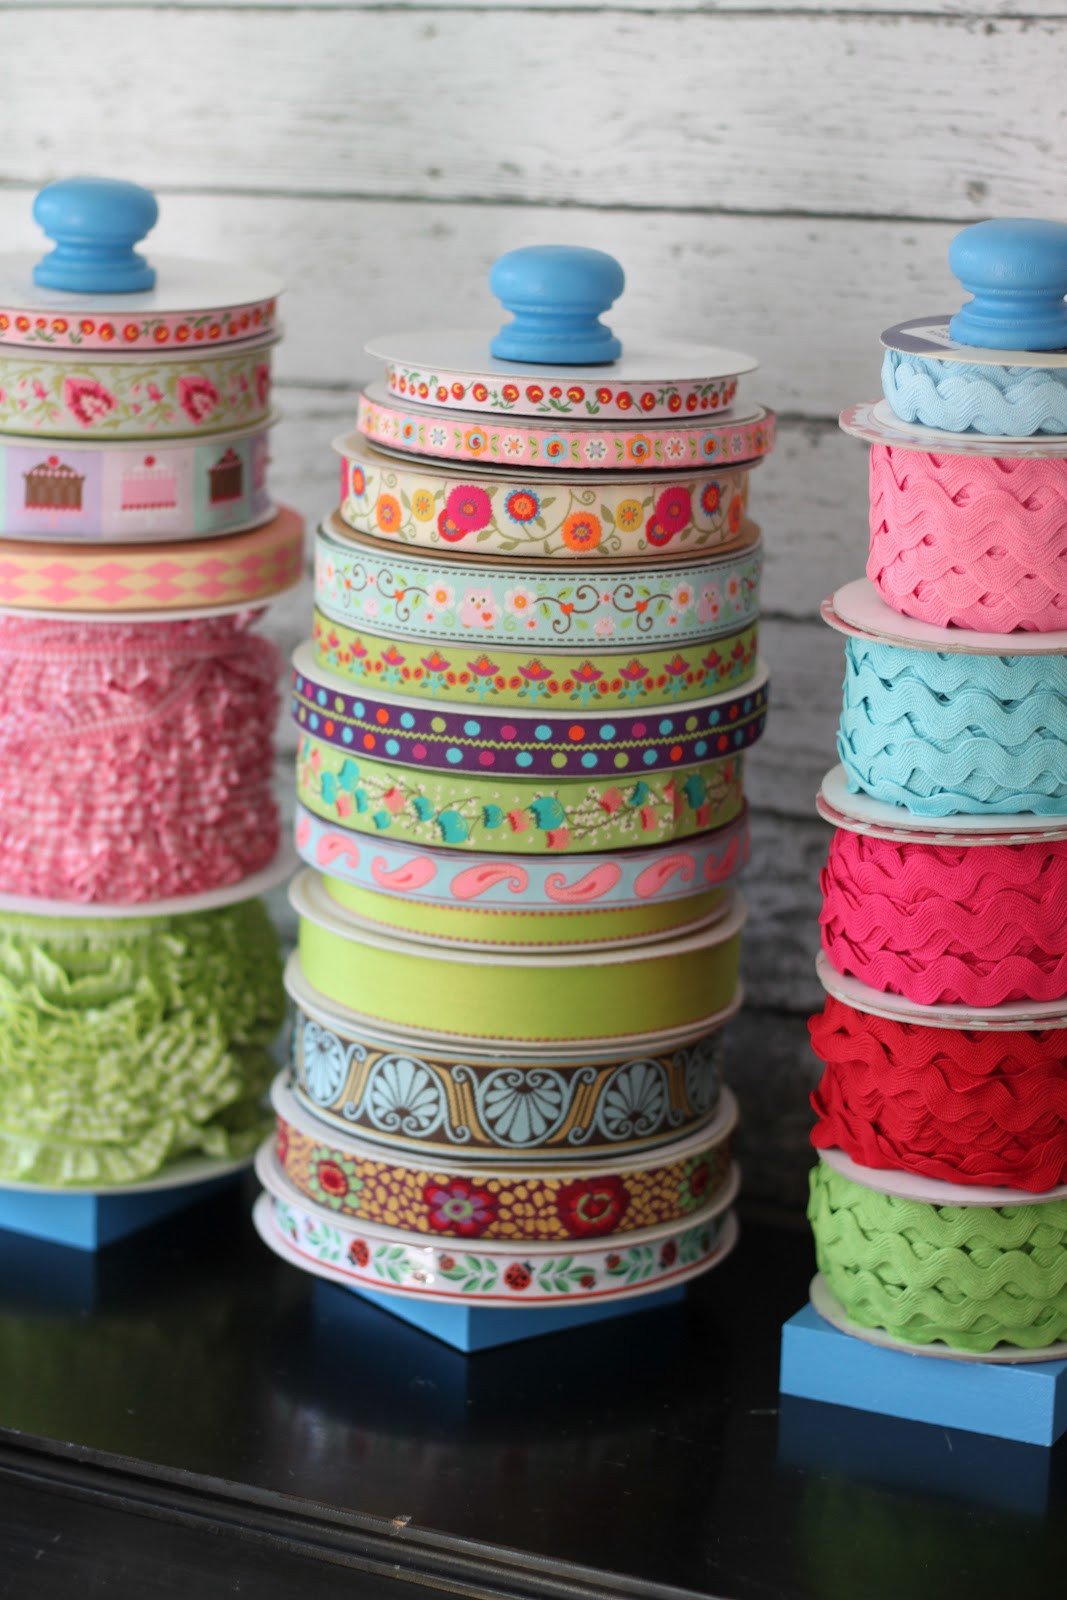 How to display ribbons spools in your store?